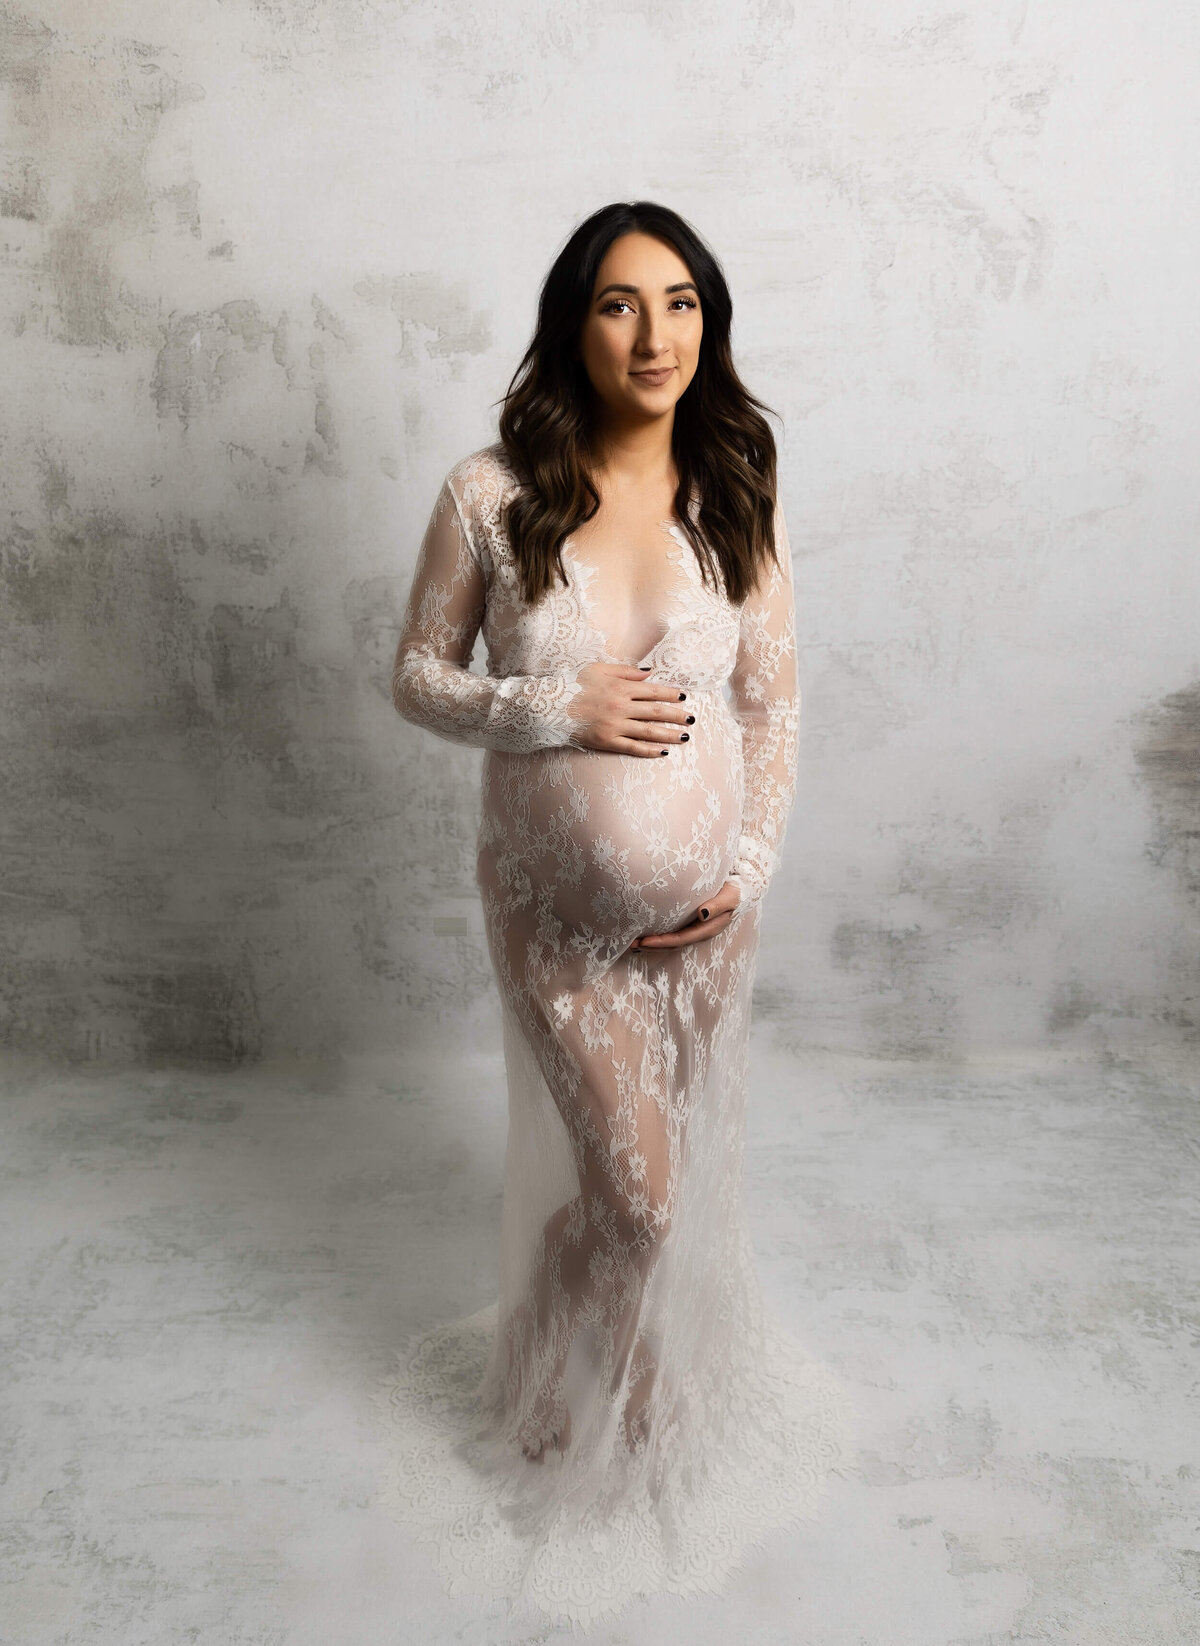 Erie Pa photography studio maternity photo of a girl in a lace dress